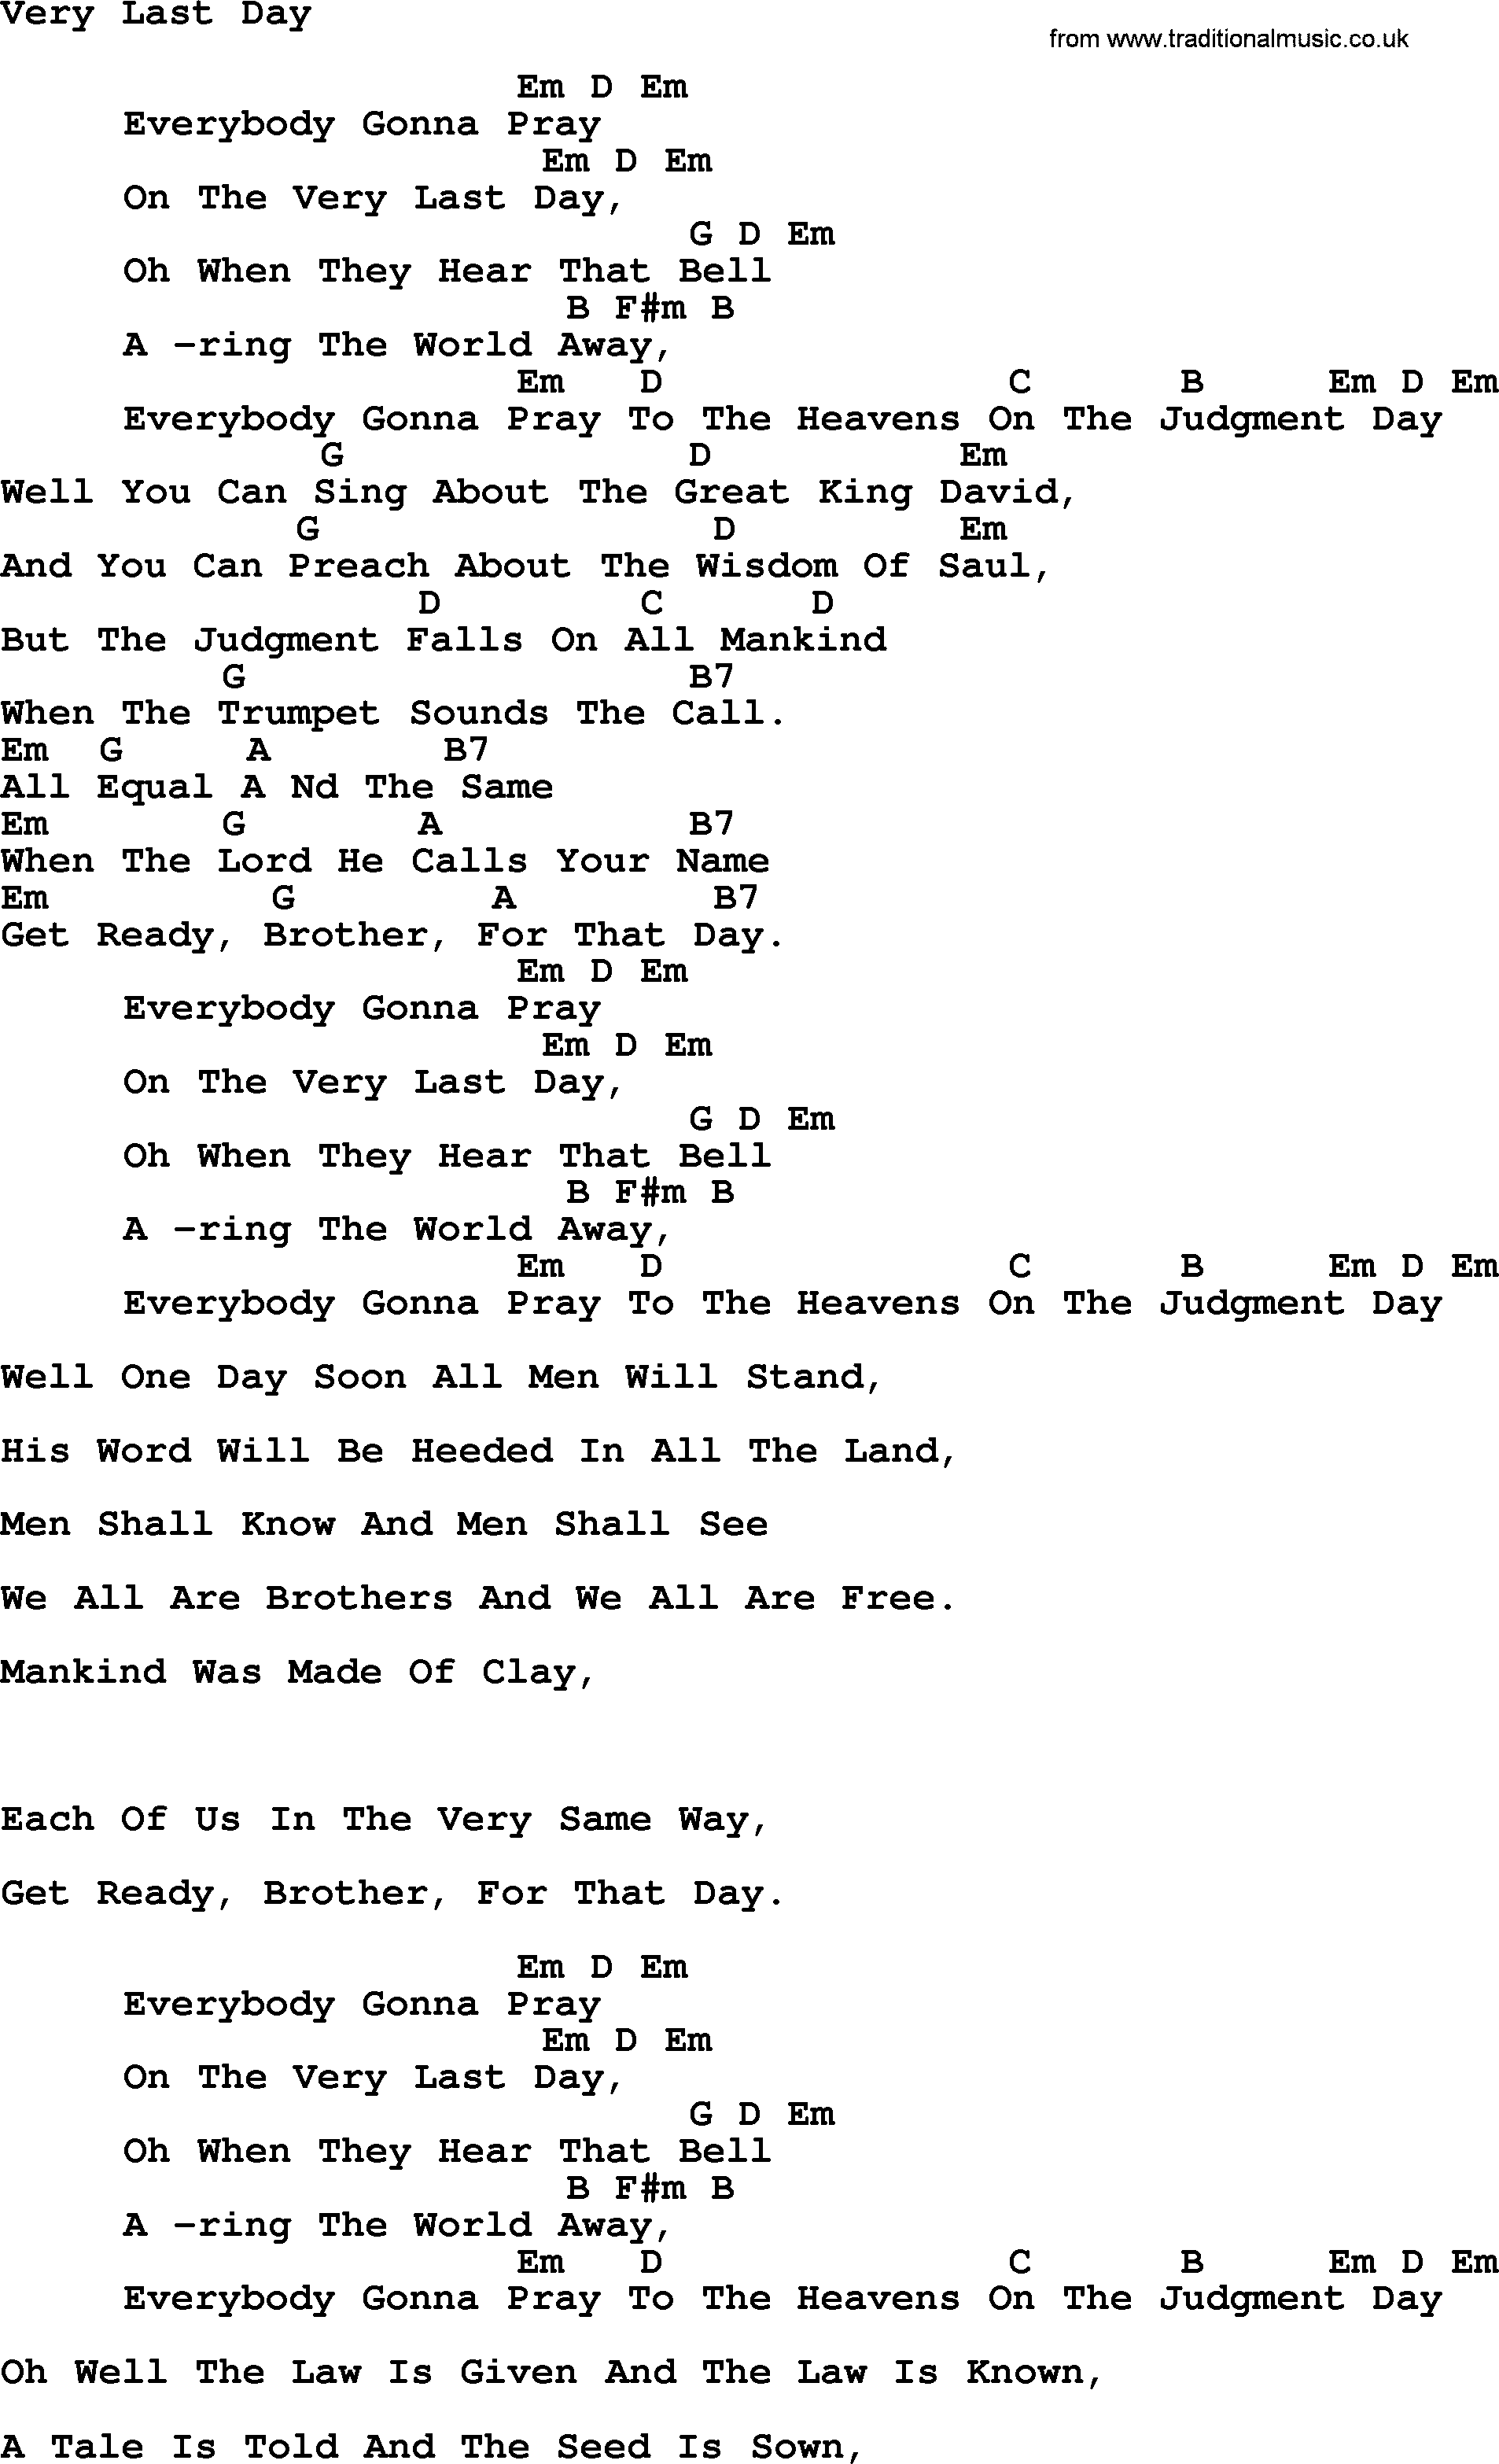 Peter, Paul and Mary song Very Last Day, lyrics and chords